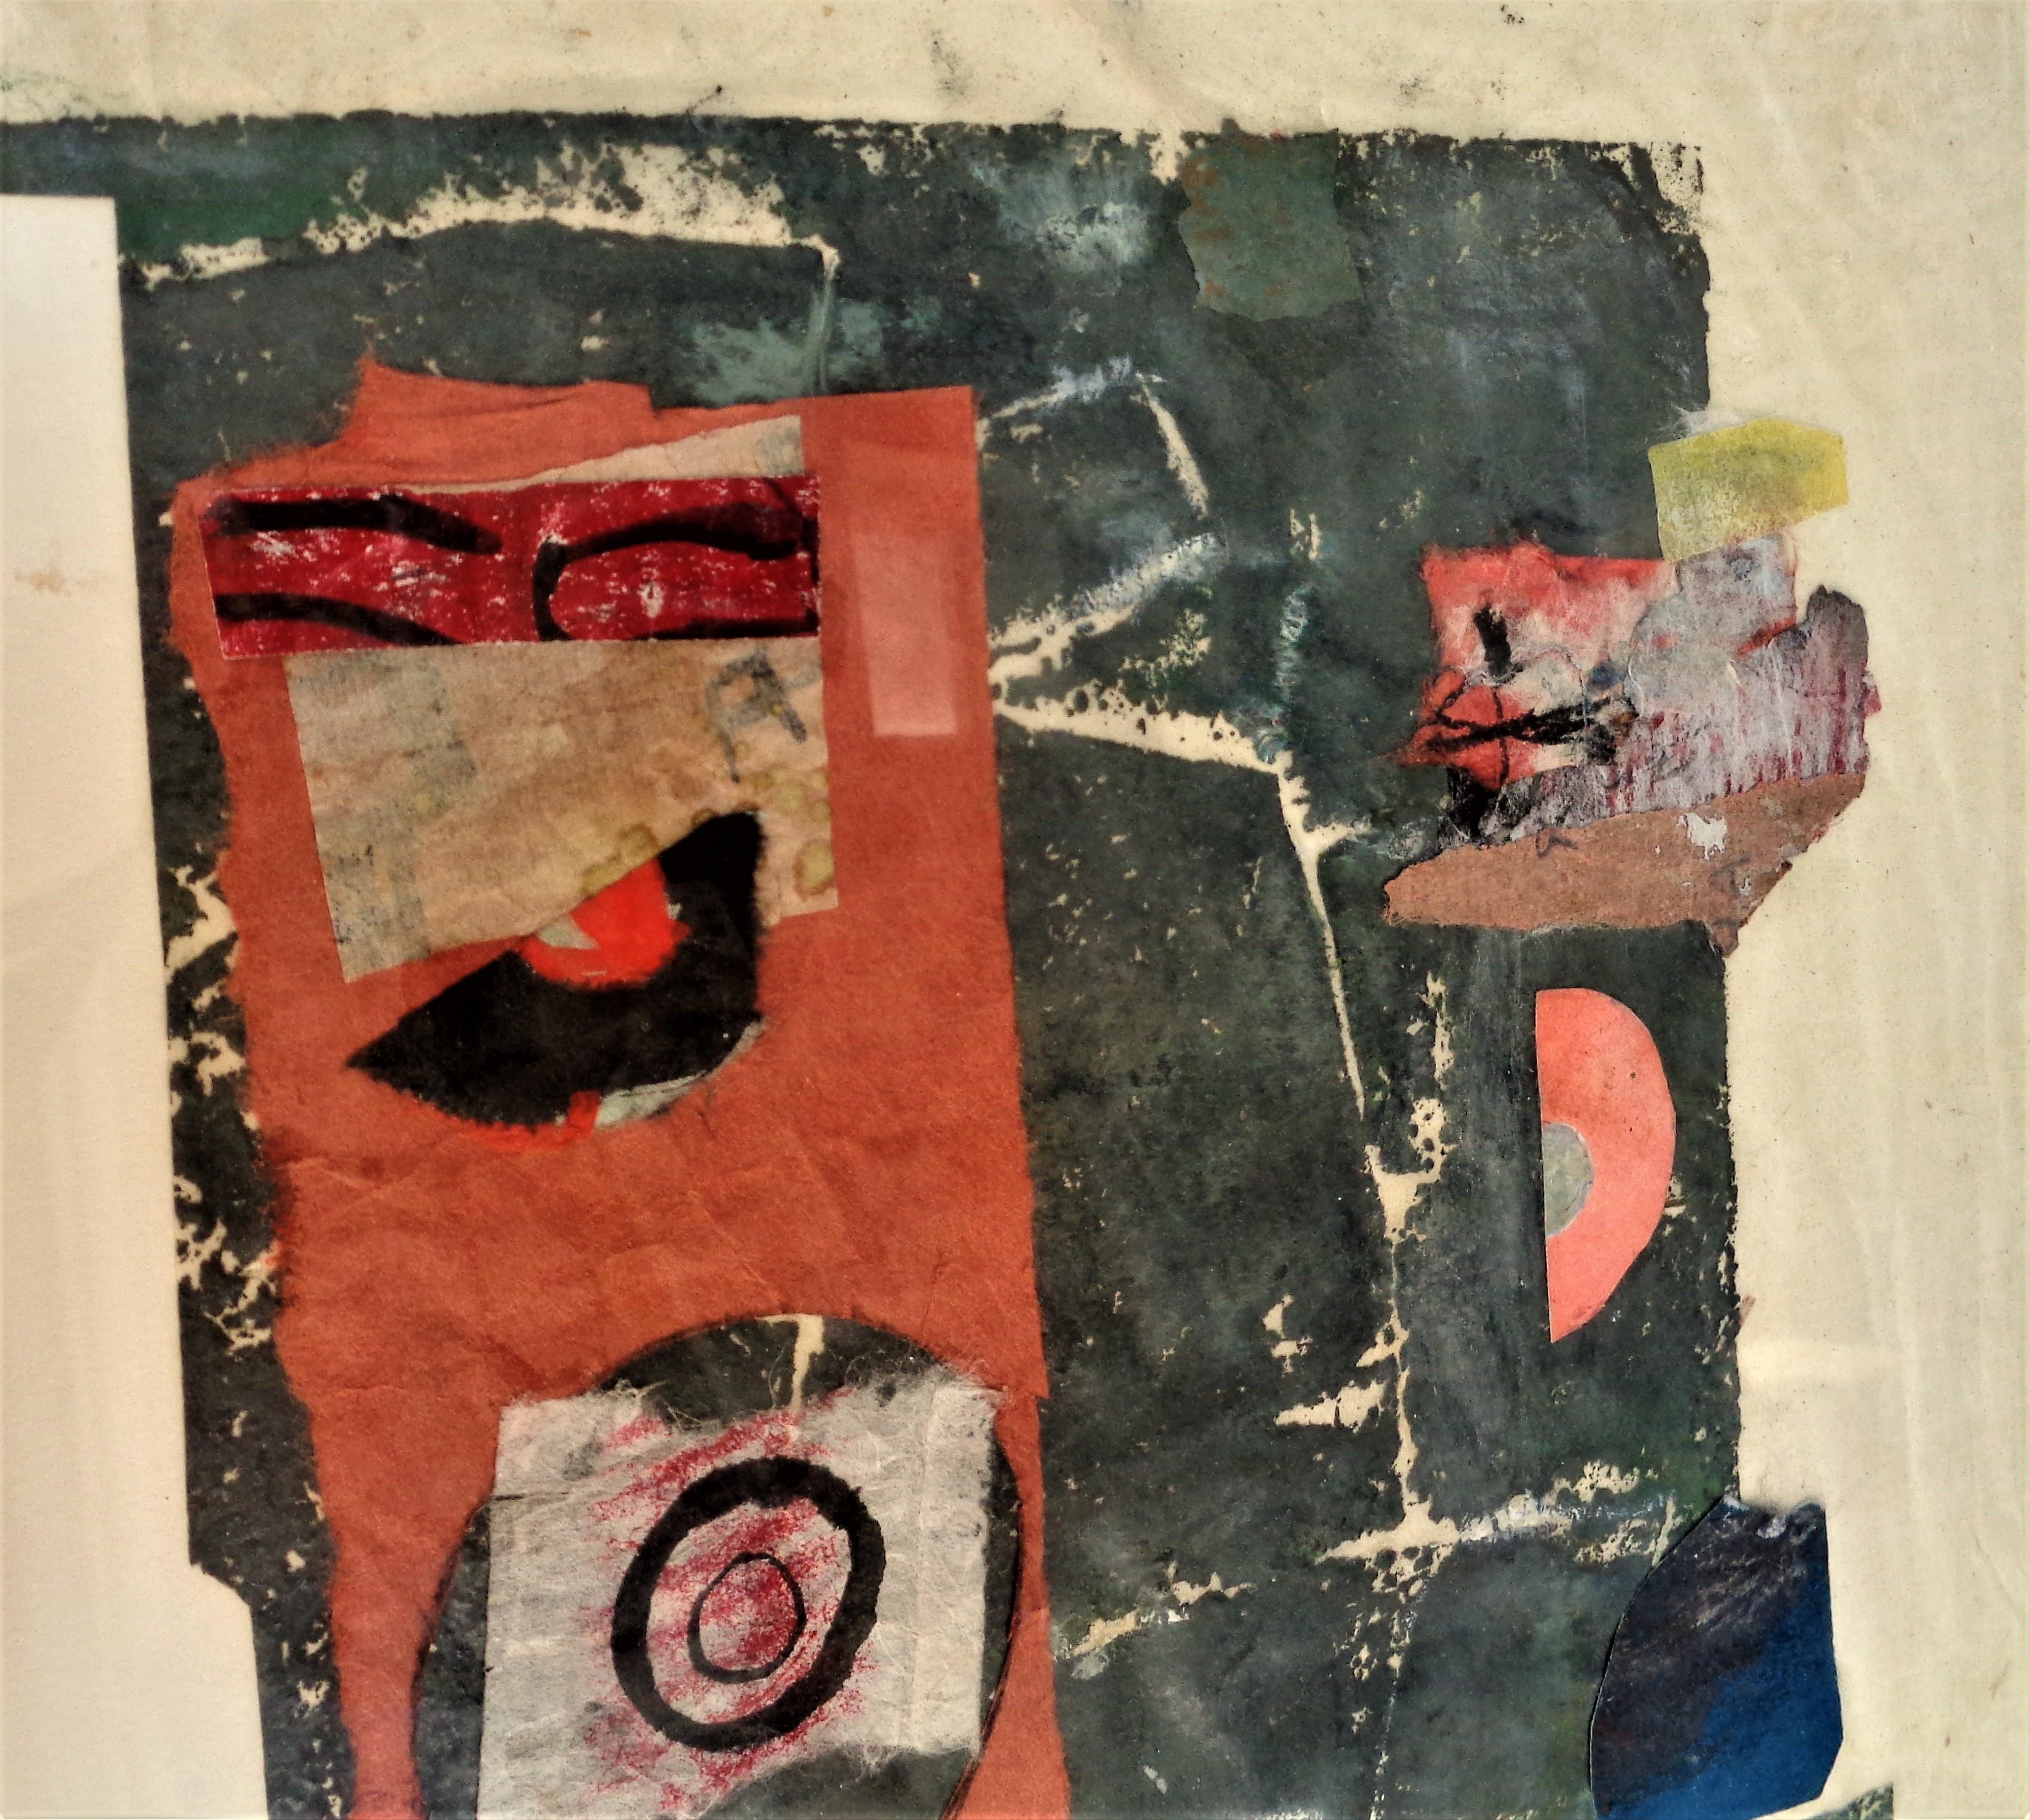 Abstract mixed media collage painting ( hand cut, hand painted paper ) by Hilda Altschule Coates ( Russian - American 1900 - 1983 ) well listed Bauhaus trained artist. Hand ink signed lower right H. Altschule - '71 & pencil signed '73. Great